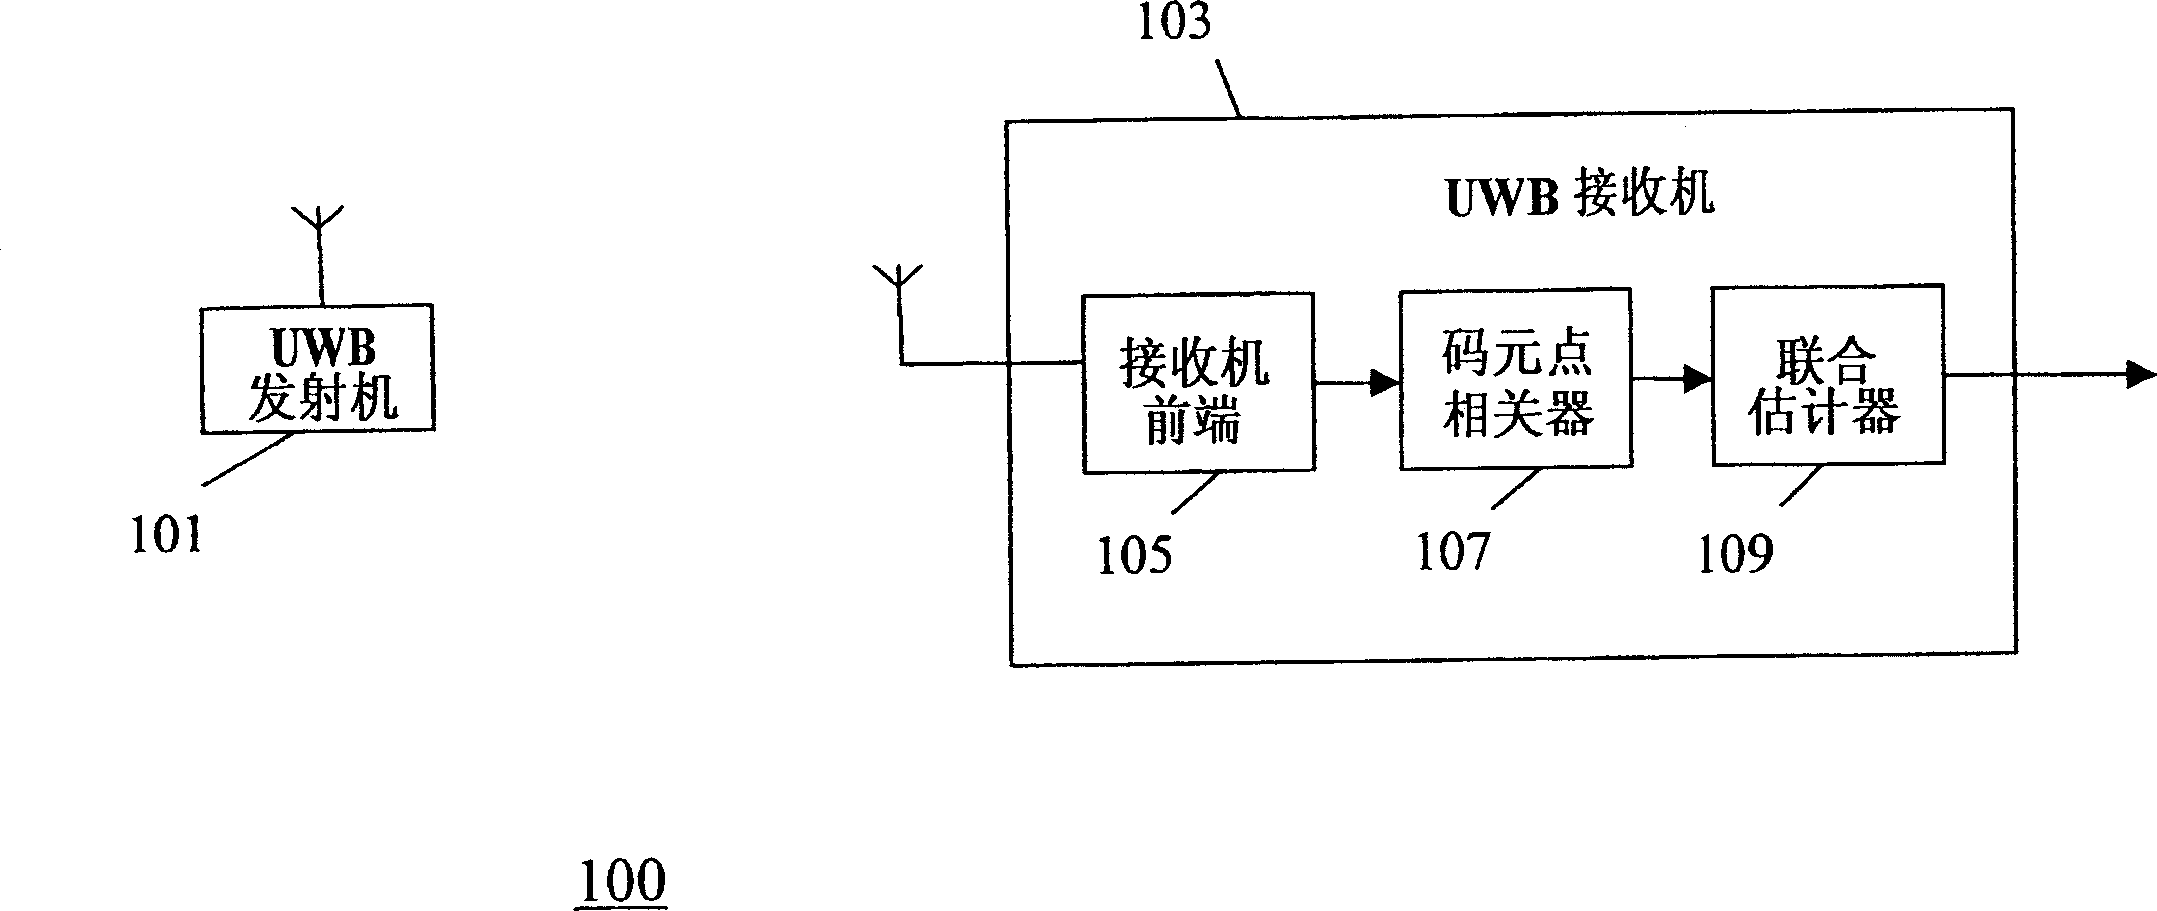 Method and receiver for receiving an ultra wide band signal